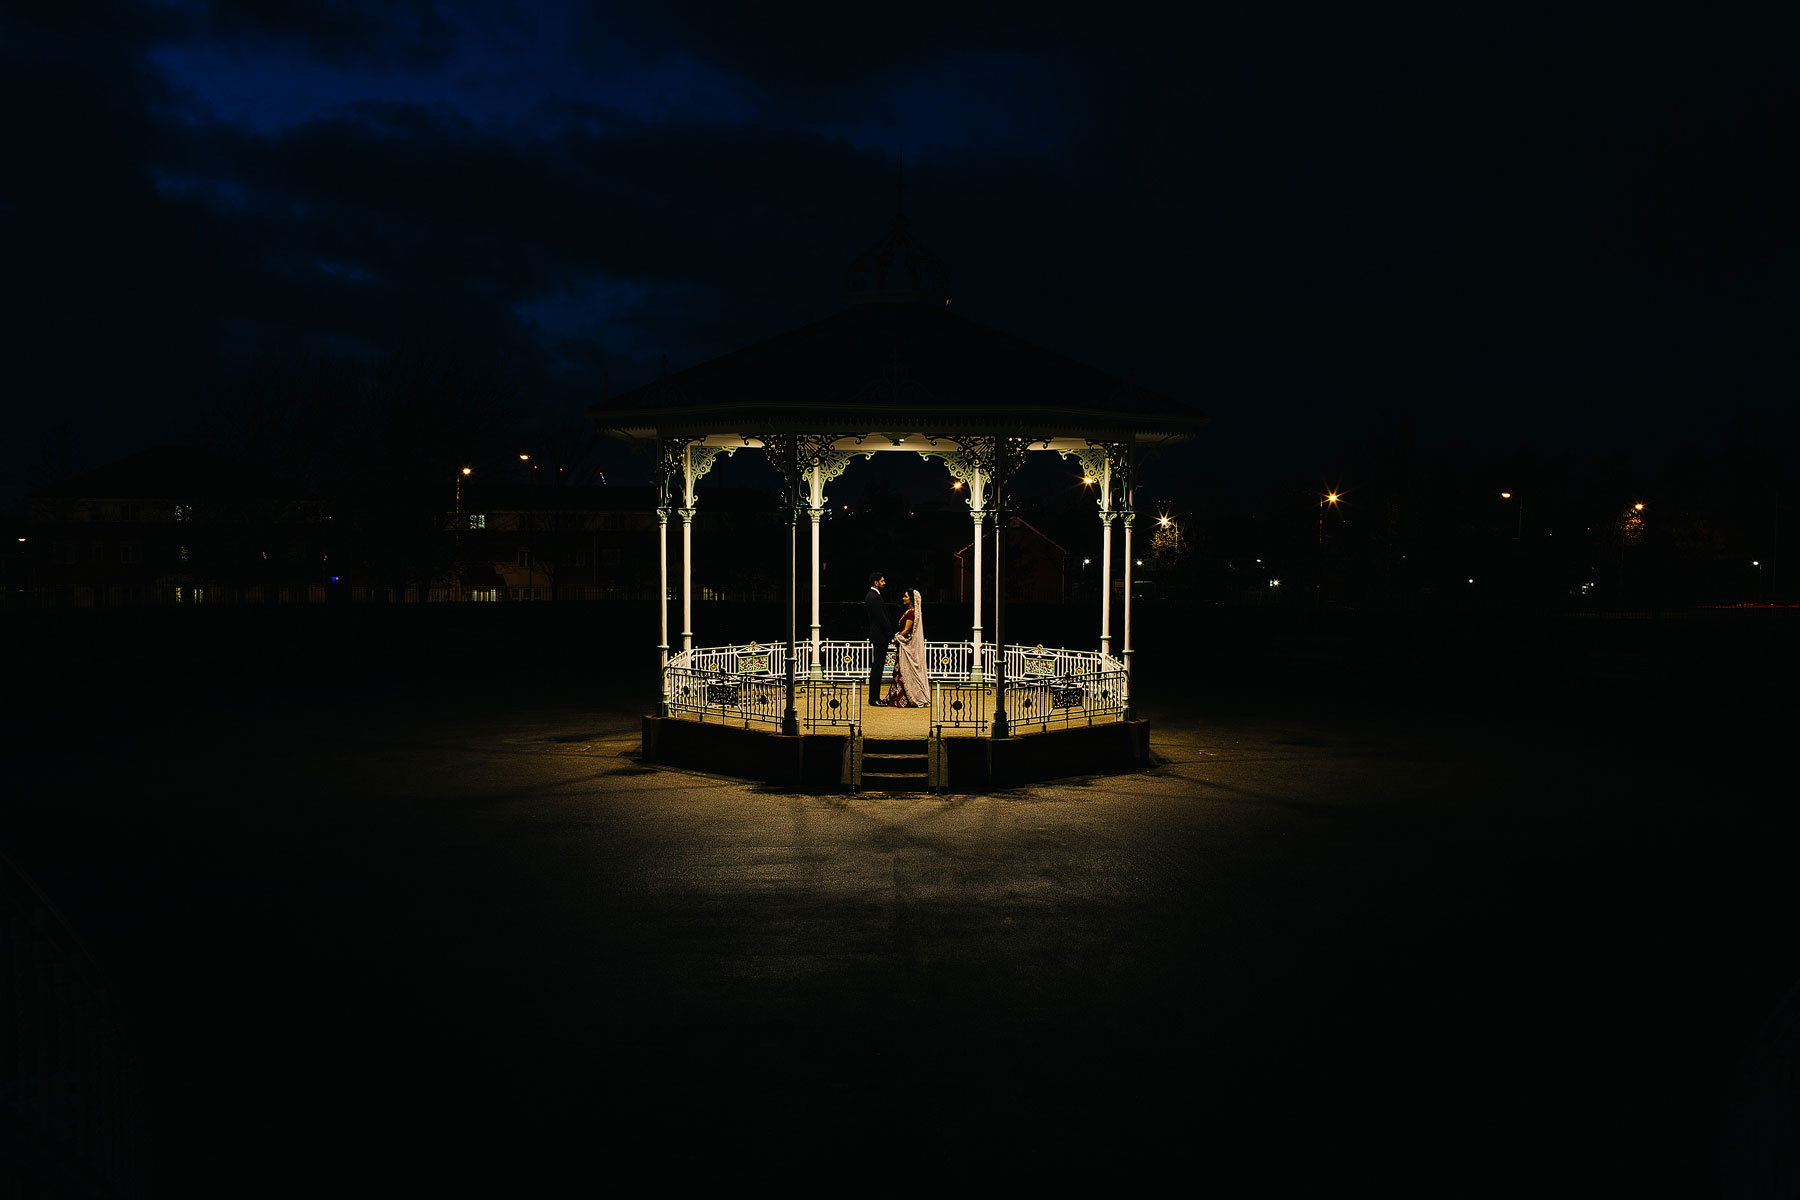 night wedding portraits for a bride and groom